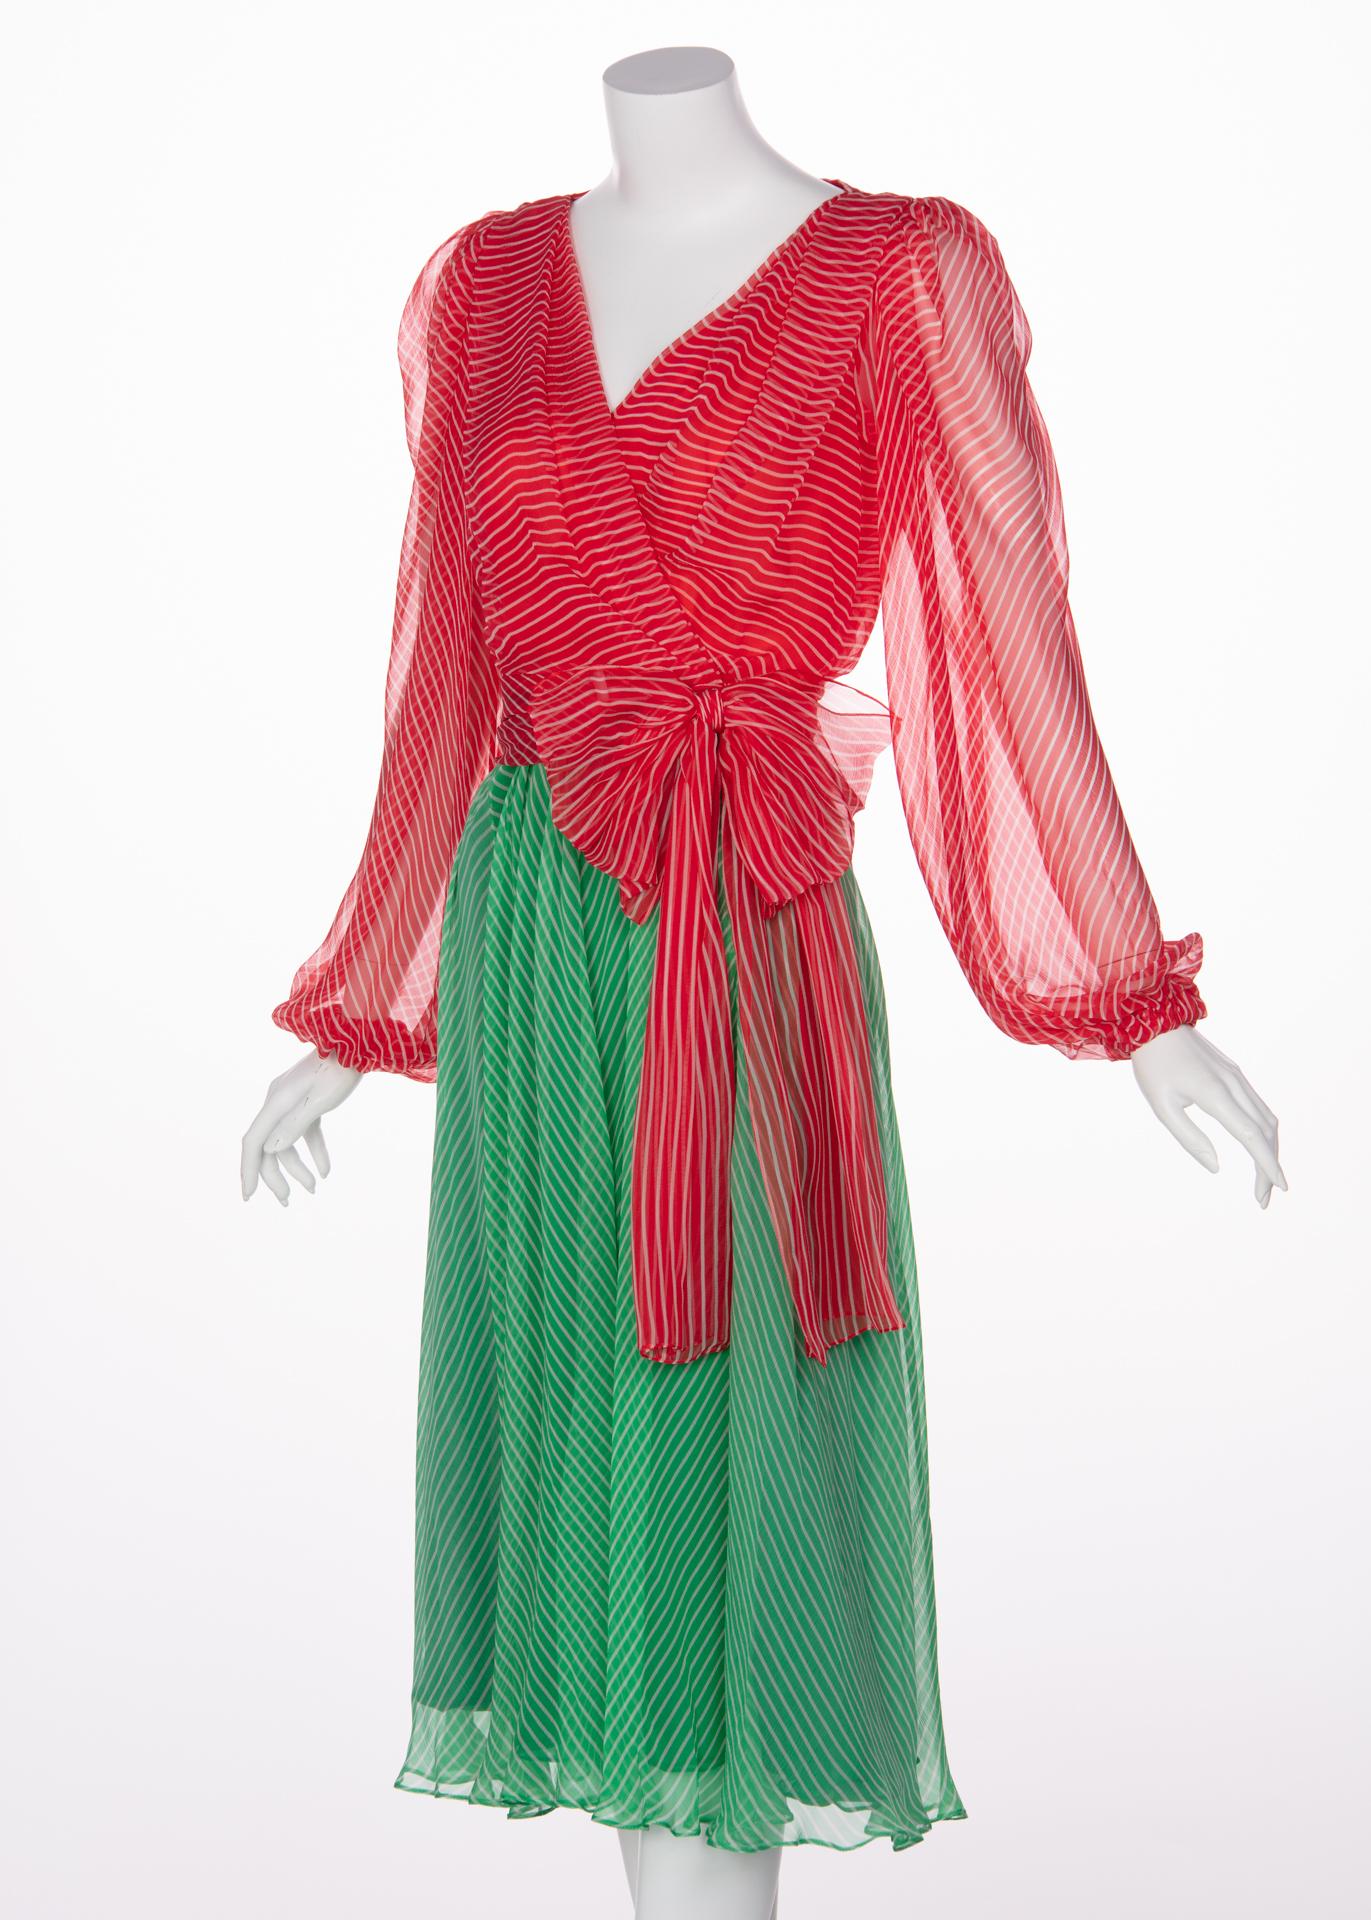 Pink Yves Saint Laurent YSL Haute Couture Red / Green Stripe Silk Chiffon Dress, 1991 For Sale